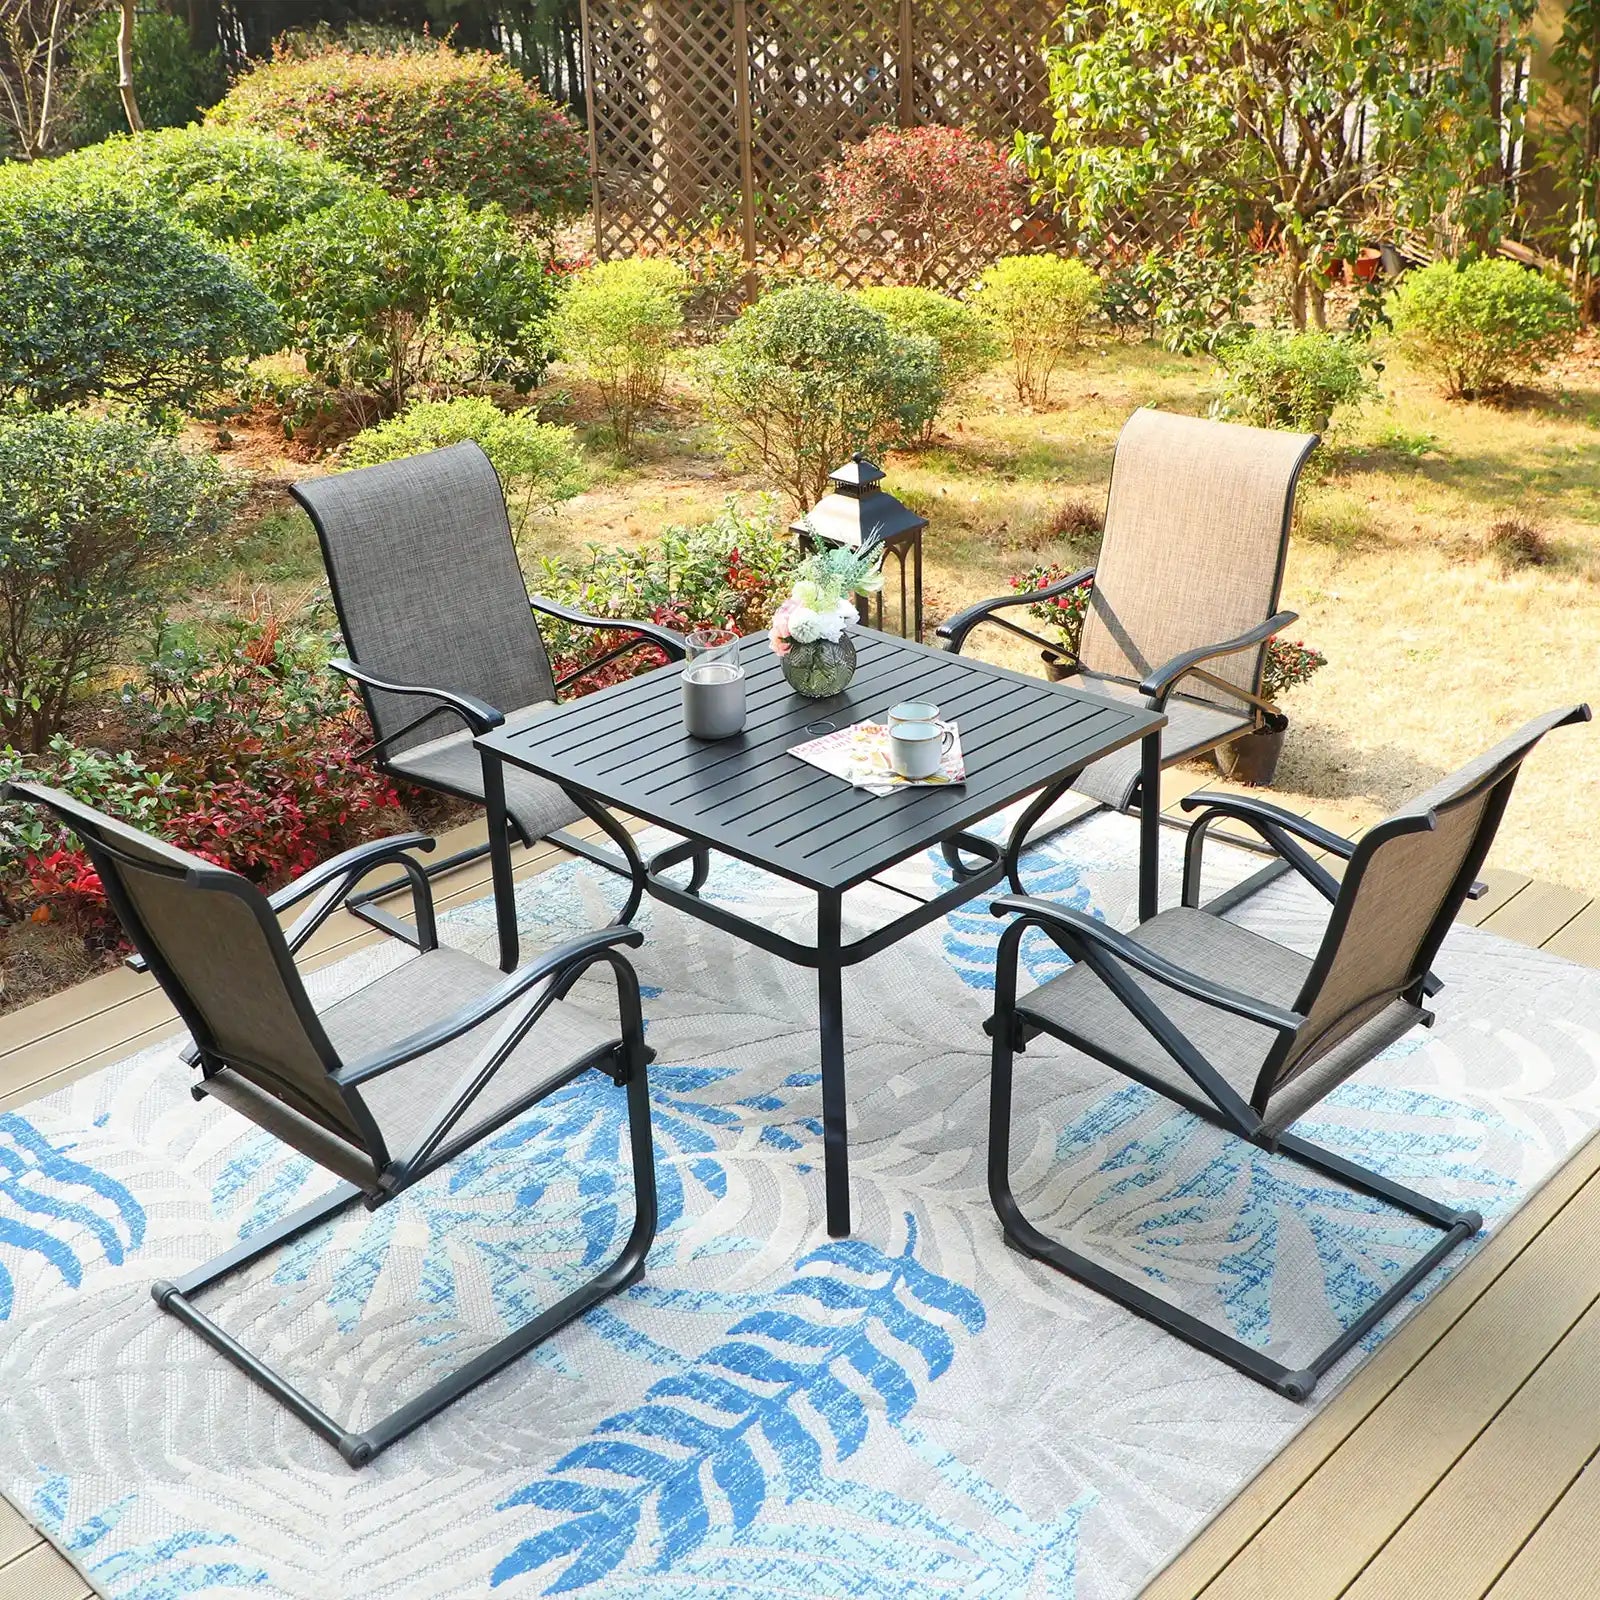 5-Pieces Patio Dining Set with 4-Pieces, Outdoor dining chairs and 1-Piece Square Metal Dining Table Suitable for Outdoor Backyard Garden, Gray